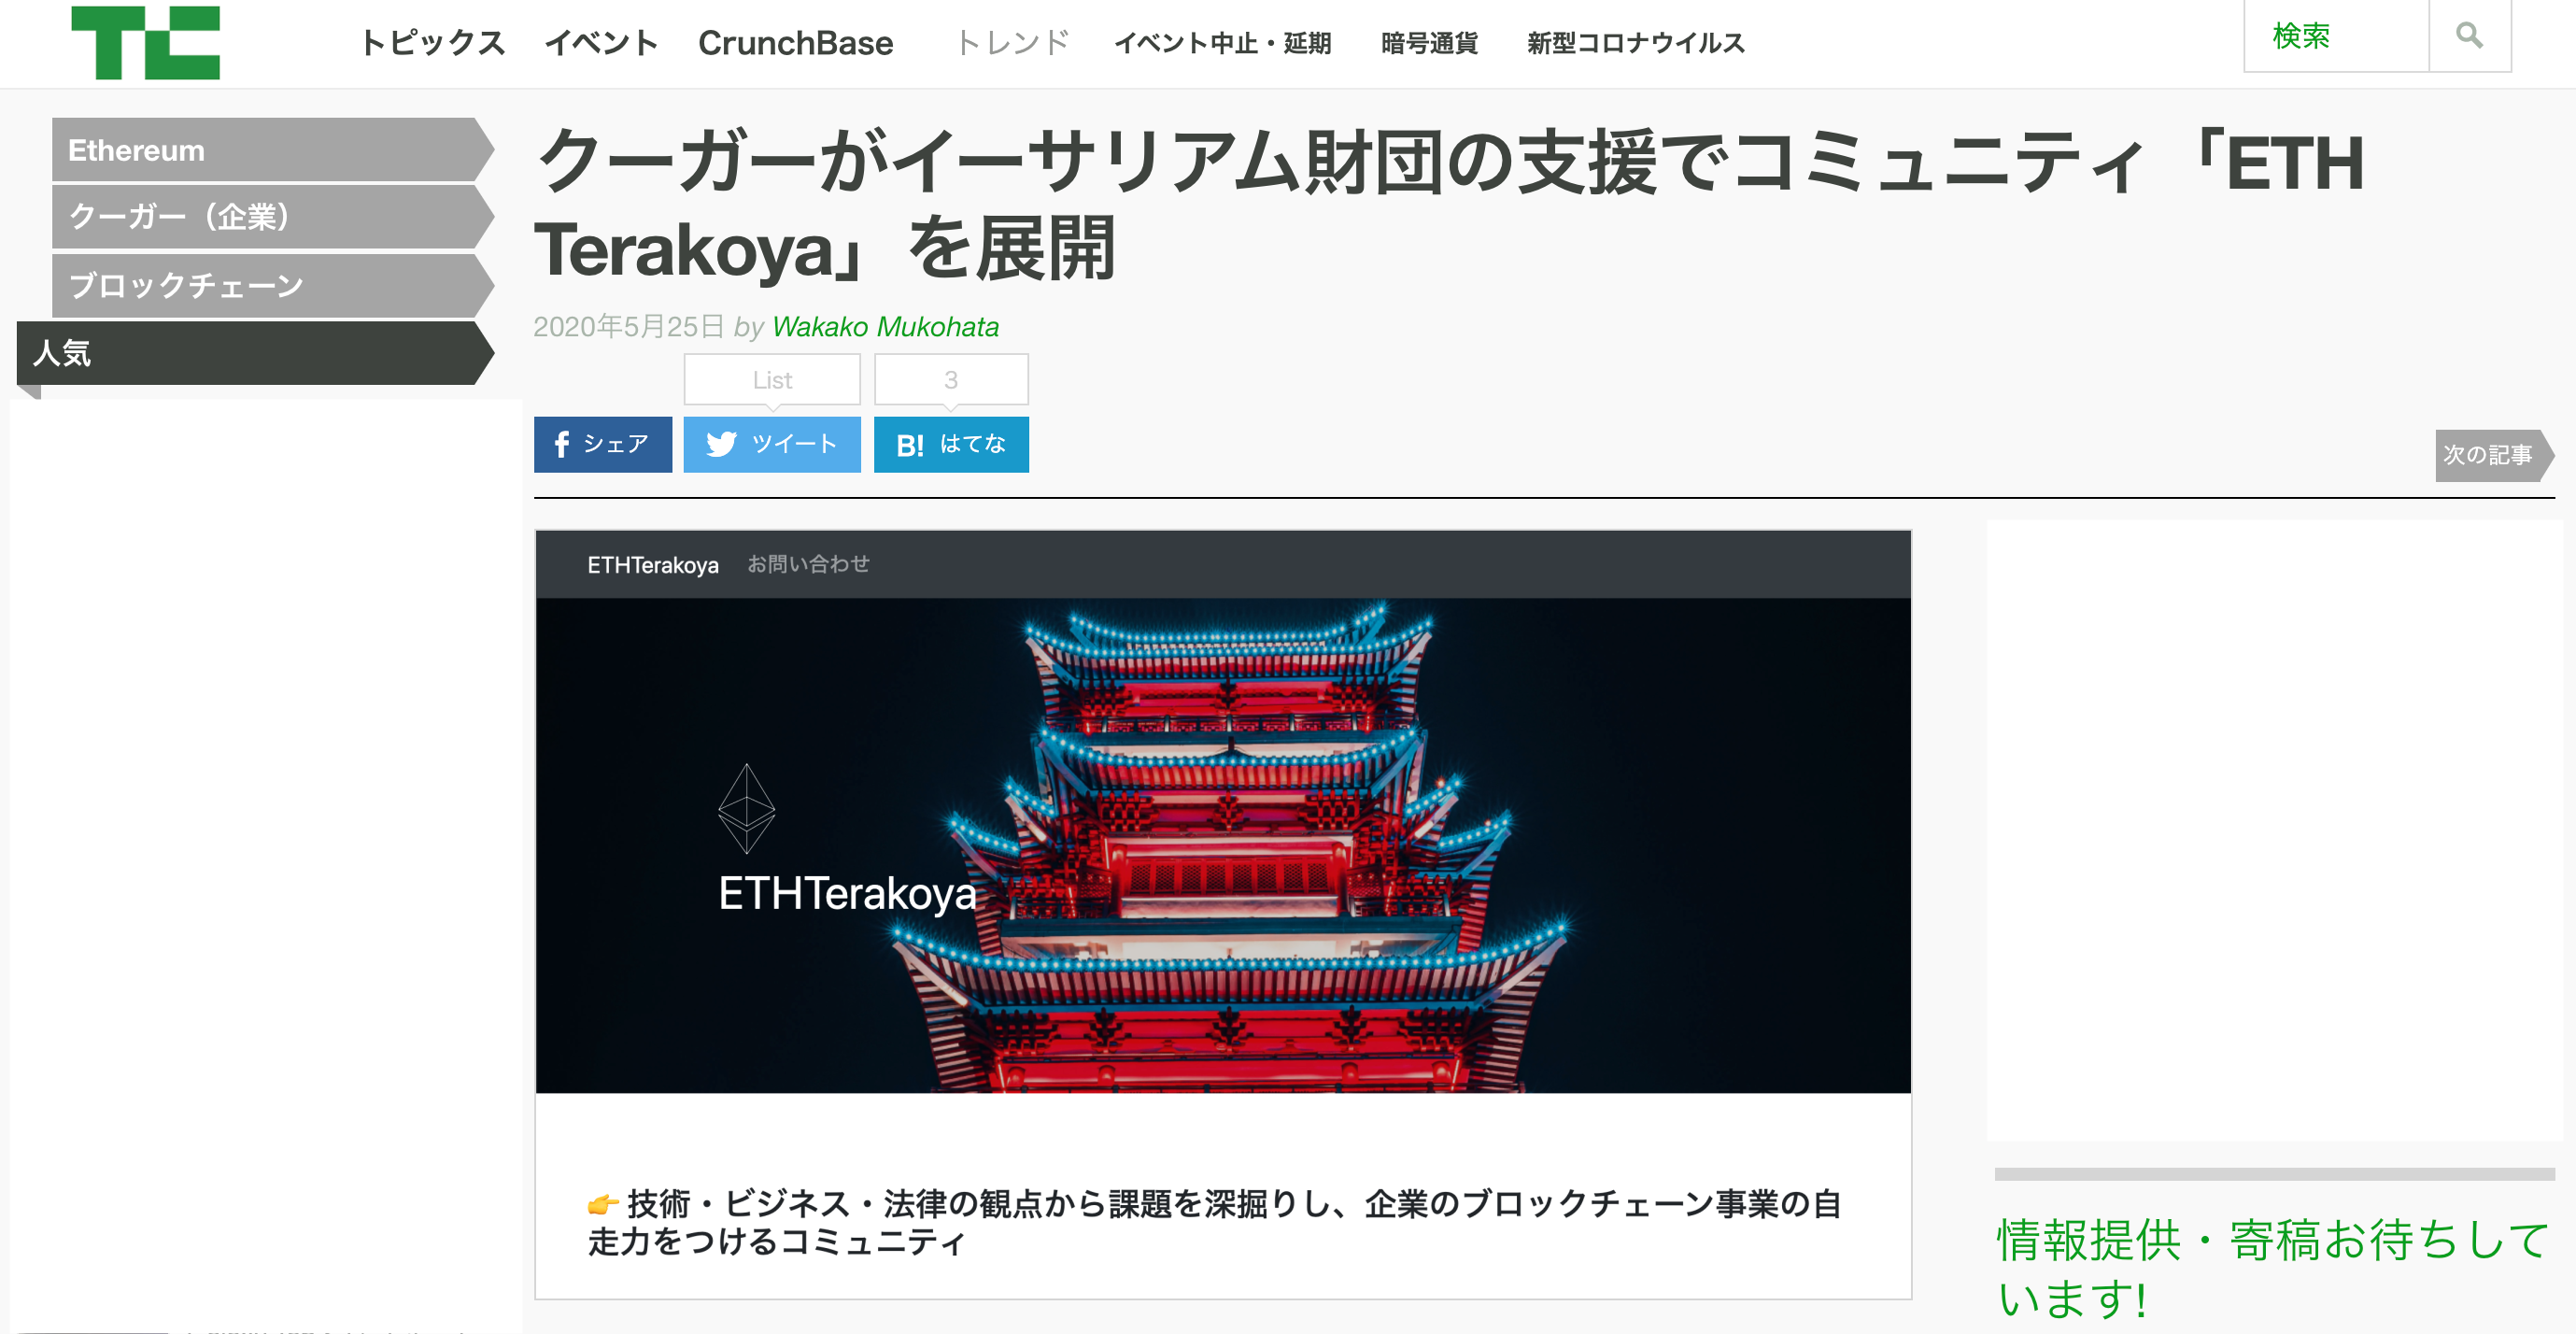 TechCrunch featured ETHTerakoya, a community launched with the support of the Ethereum Foundation.